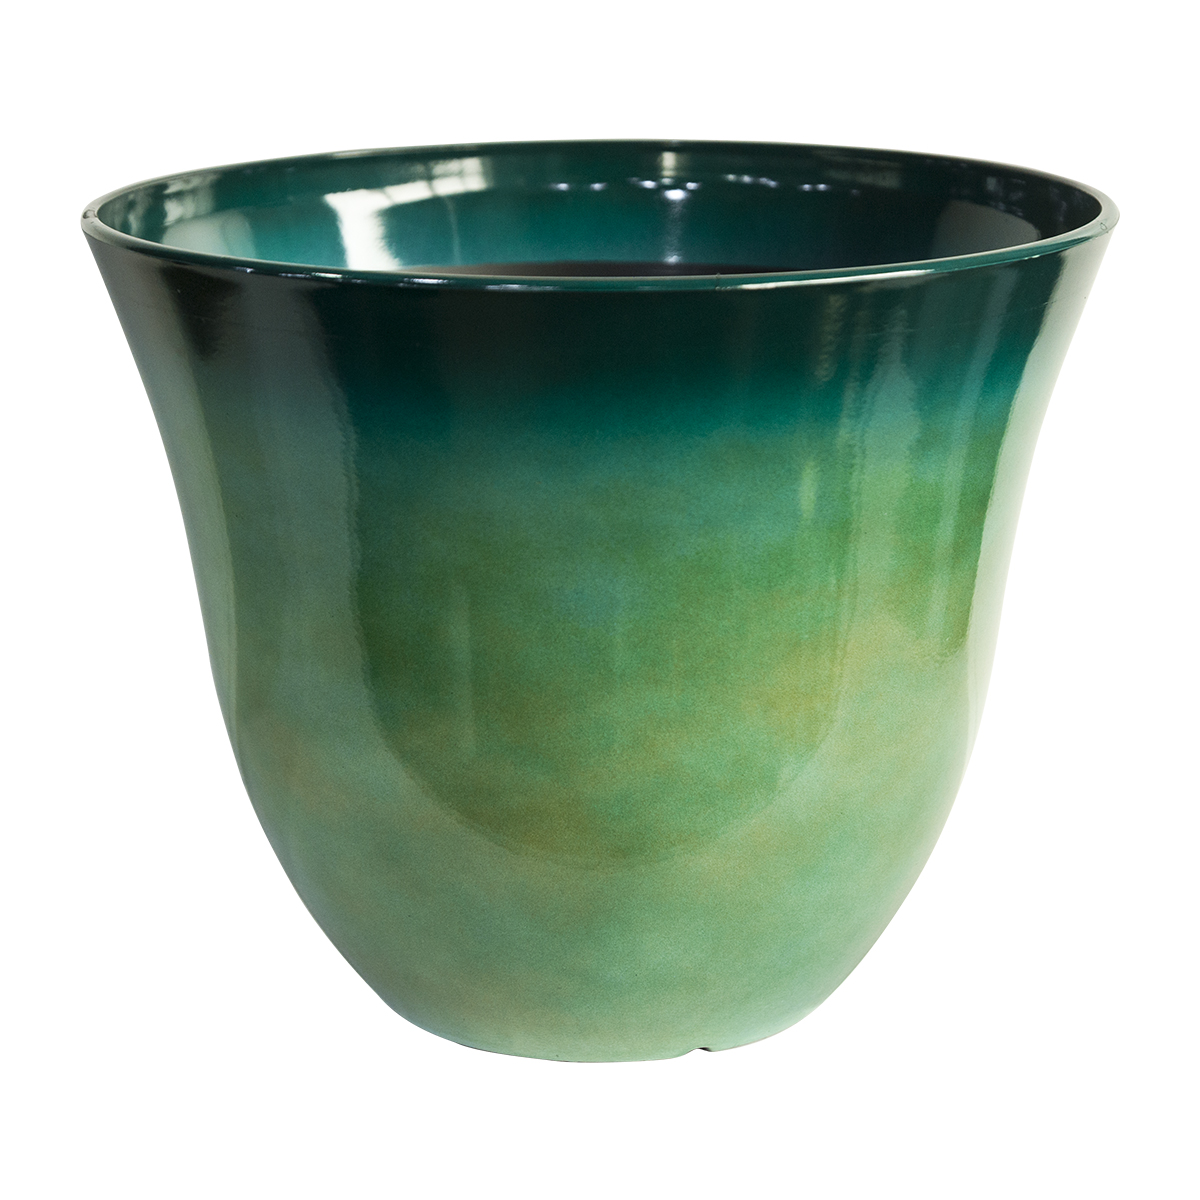 Glaze Surface Effect Poly Resin Round Planter